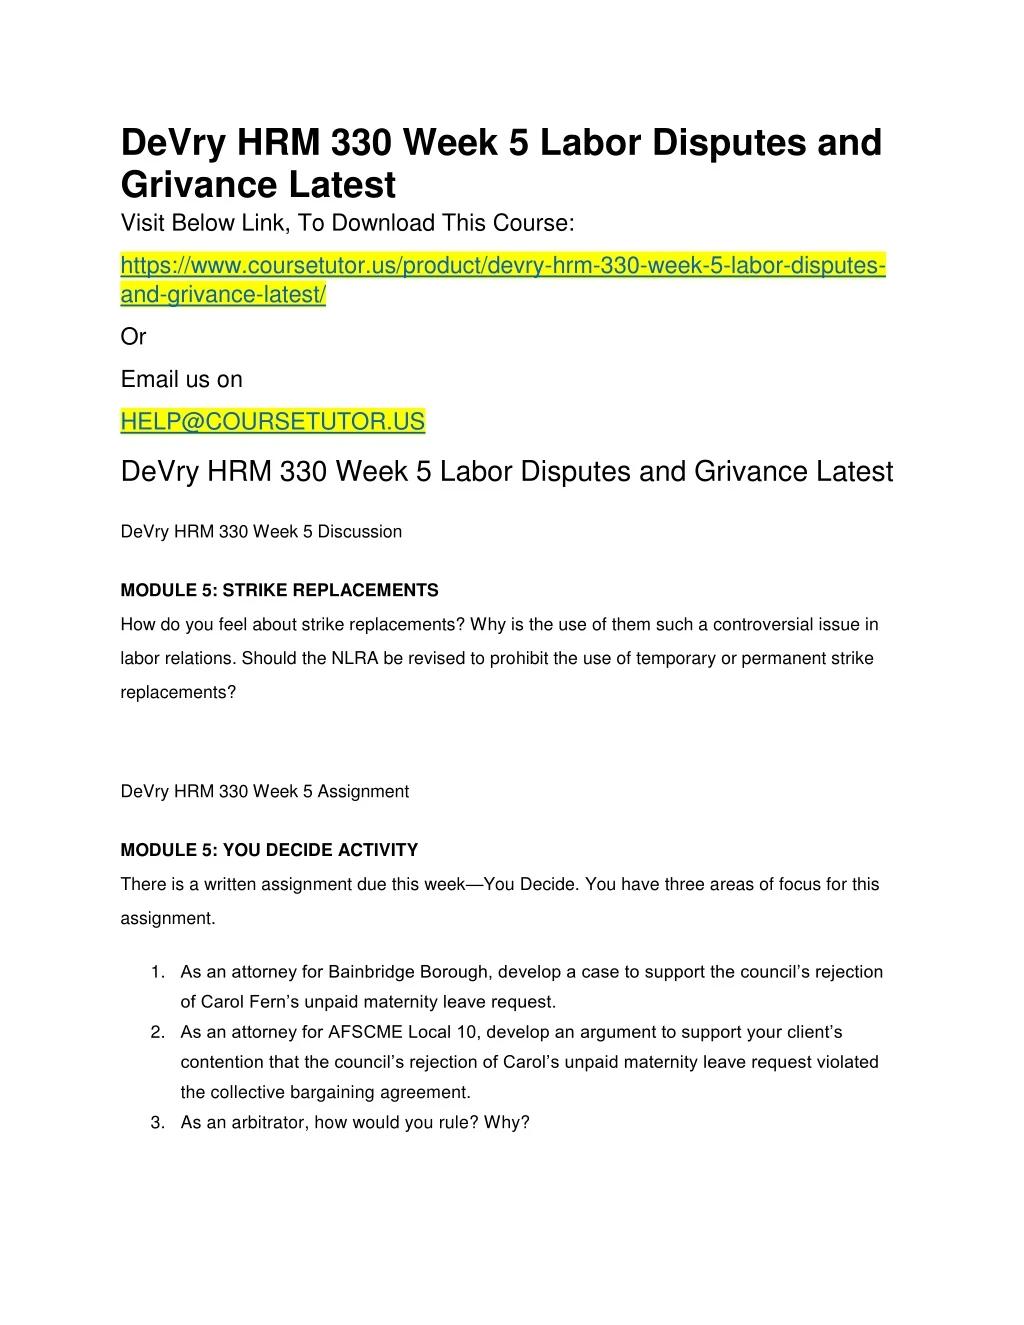 devry hrm 330 week 5 labor disputes and grivance